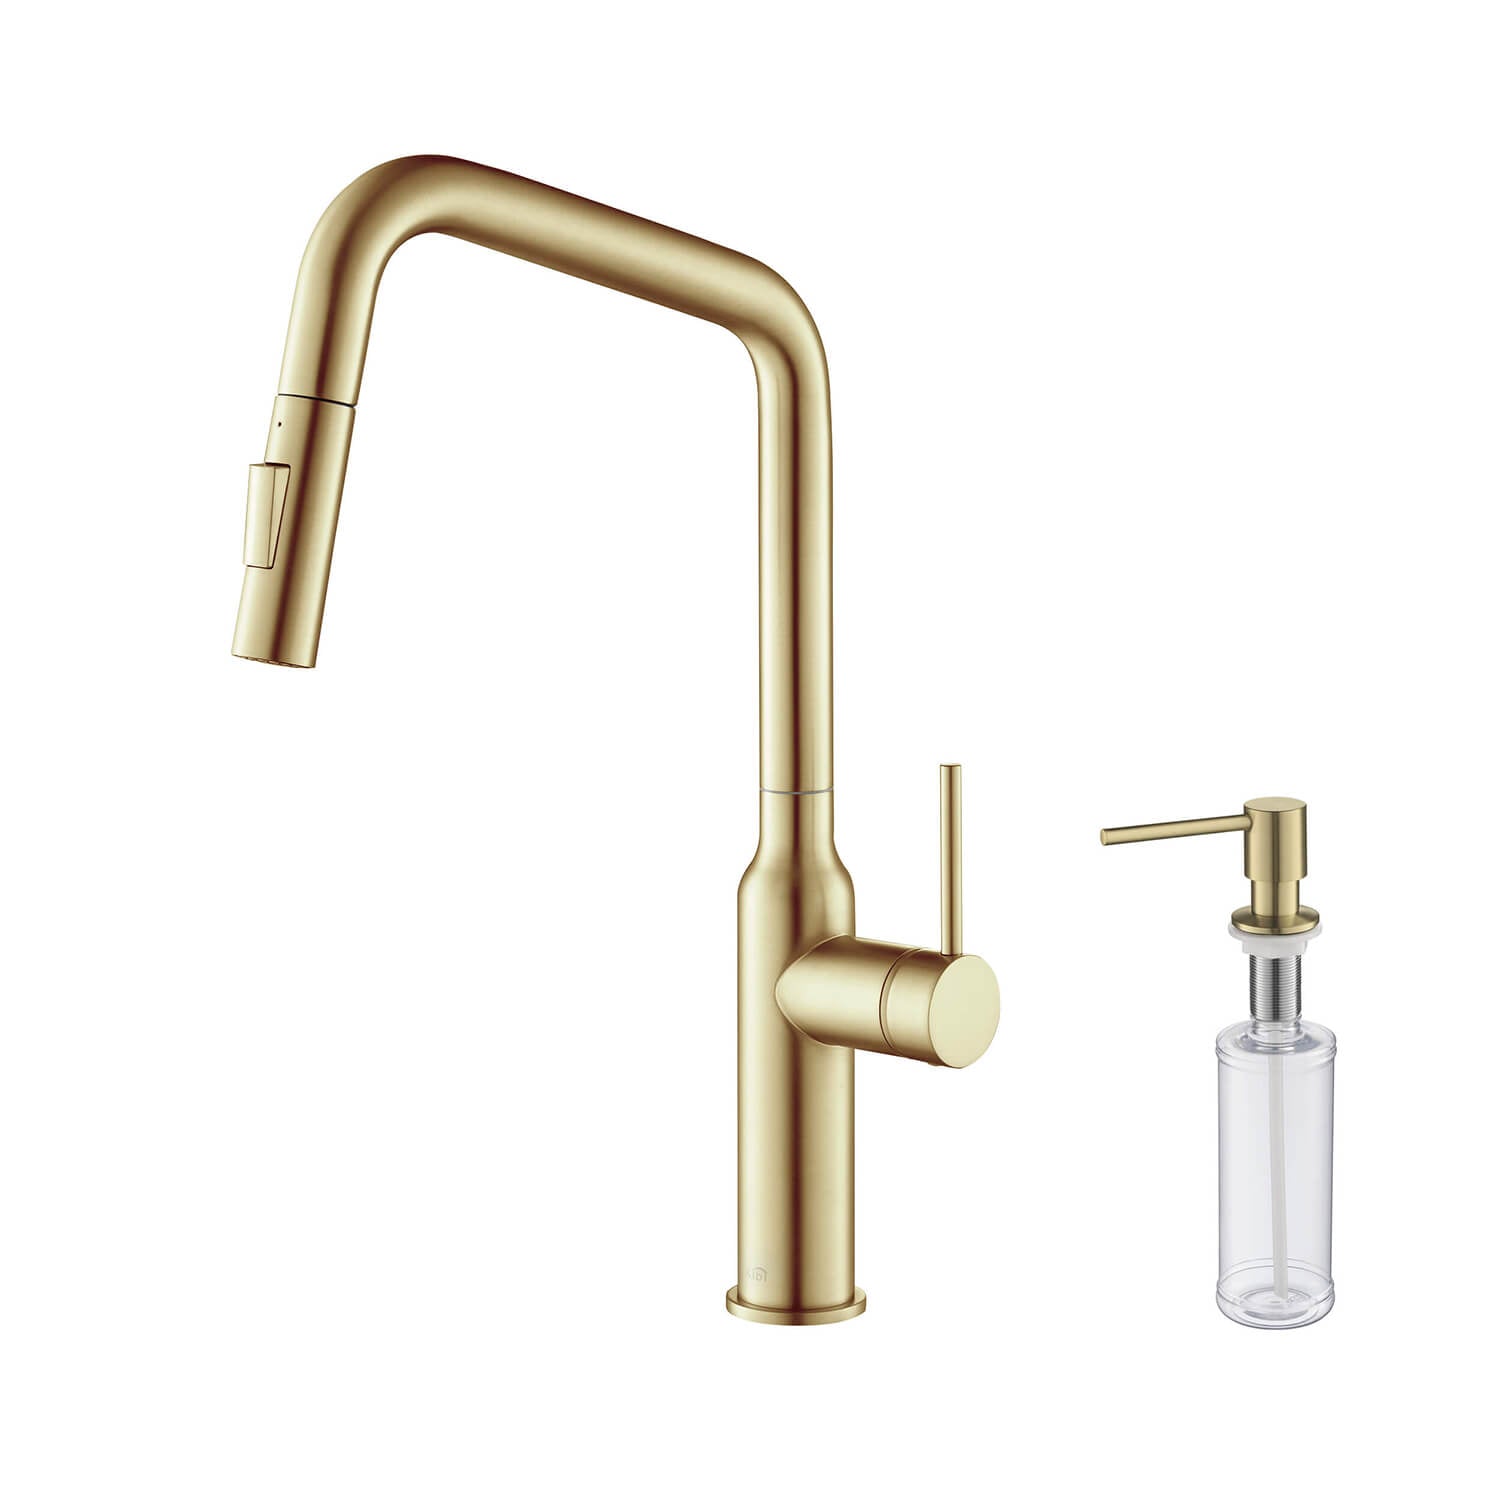 Kibi Macon Single Handle High Arc Pull Down Kitchen Faucet With Soap Dispenser in Brushed Gold Finish